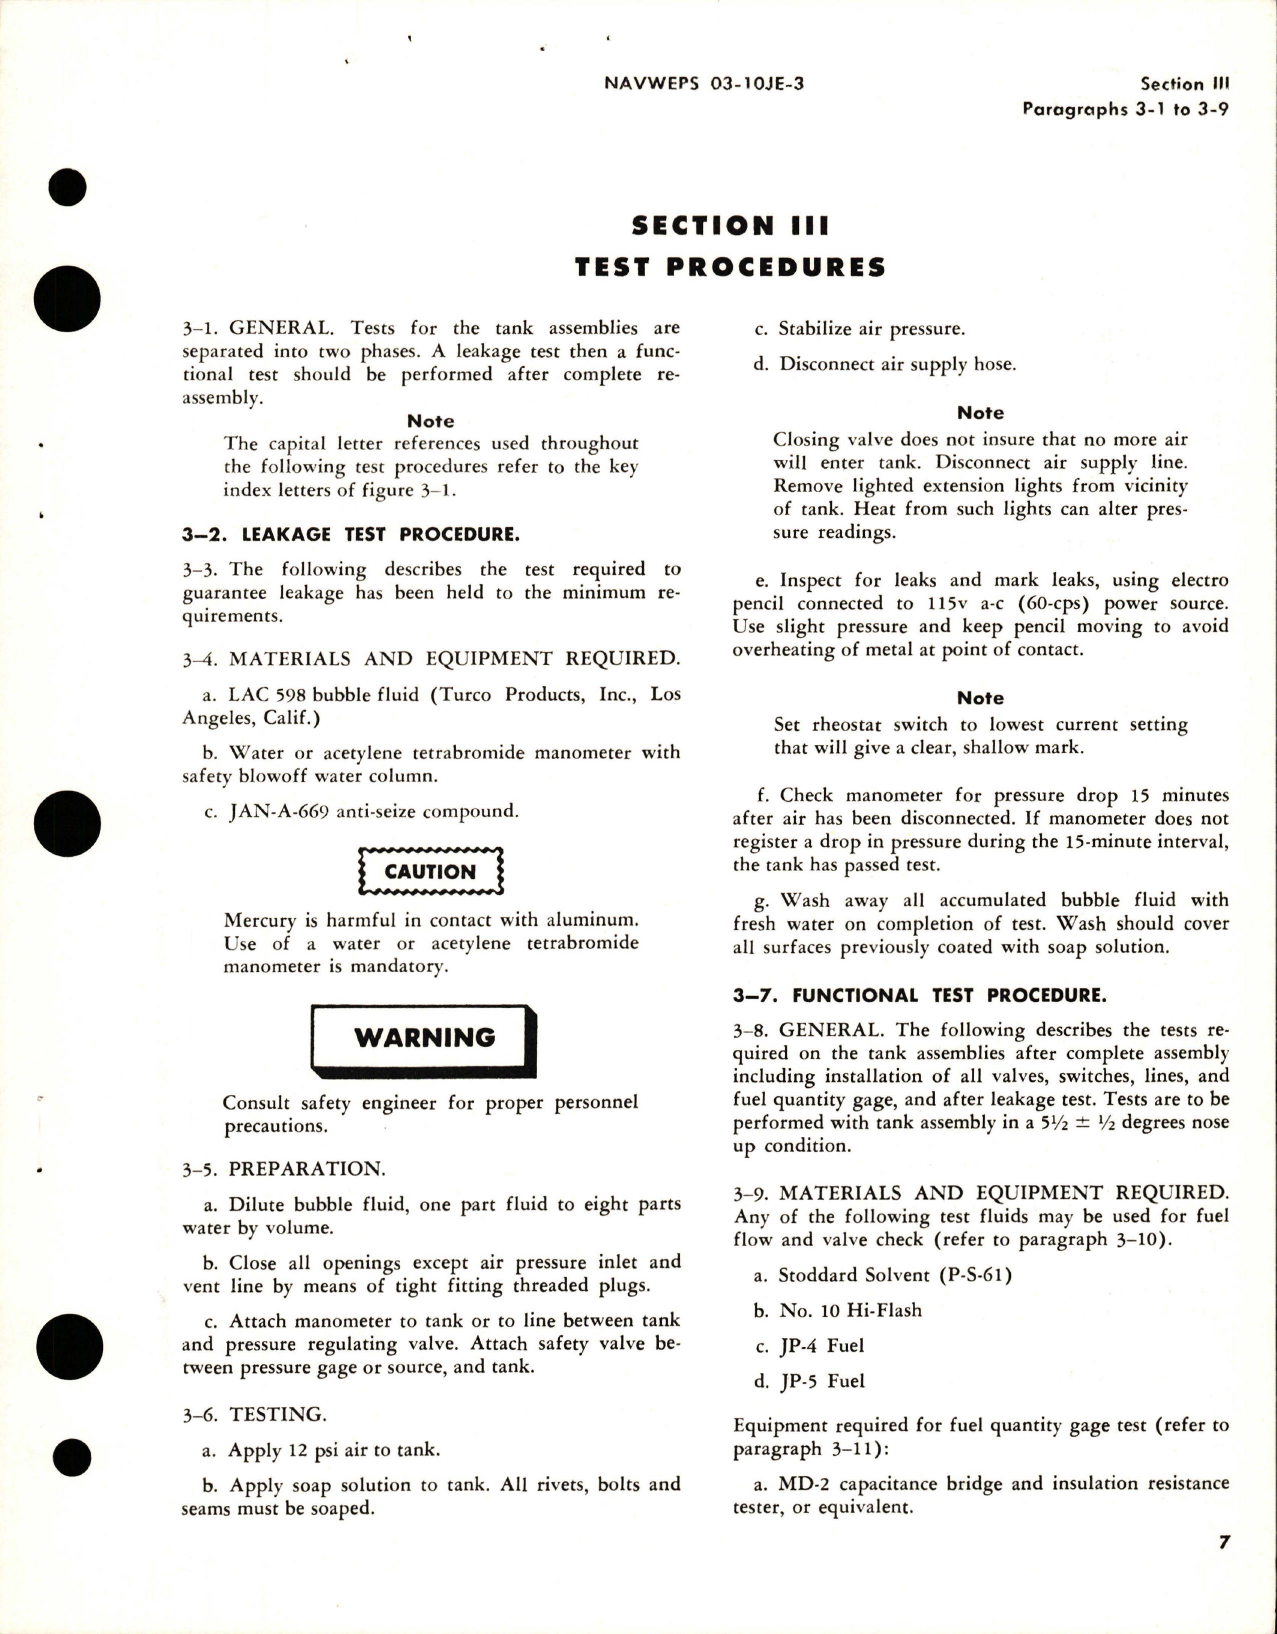 Sample page 5 from AirCorps Library document: Overhaul Instructions for Fuel Tank Assembly - 400 Gallon - Parts 5556400, 5556400-501, and 5556400-503